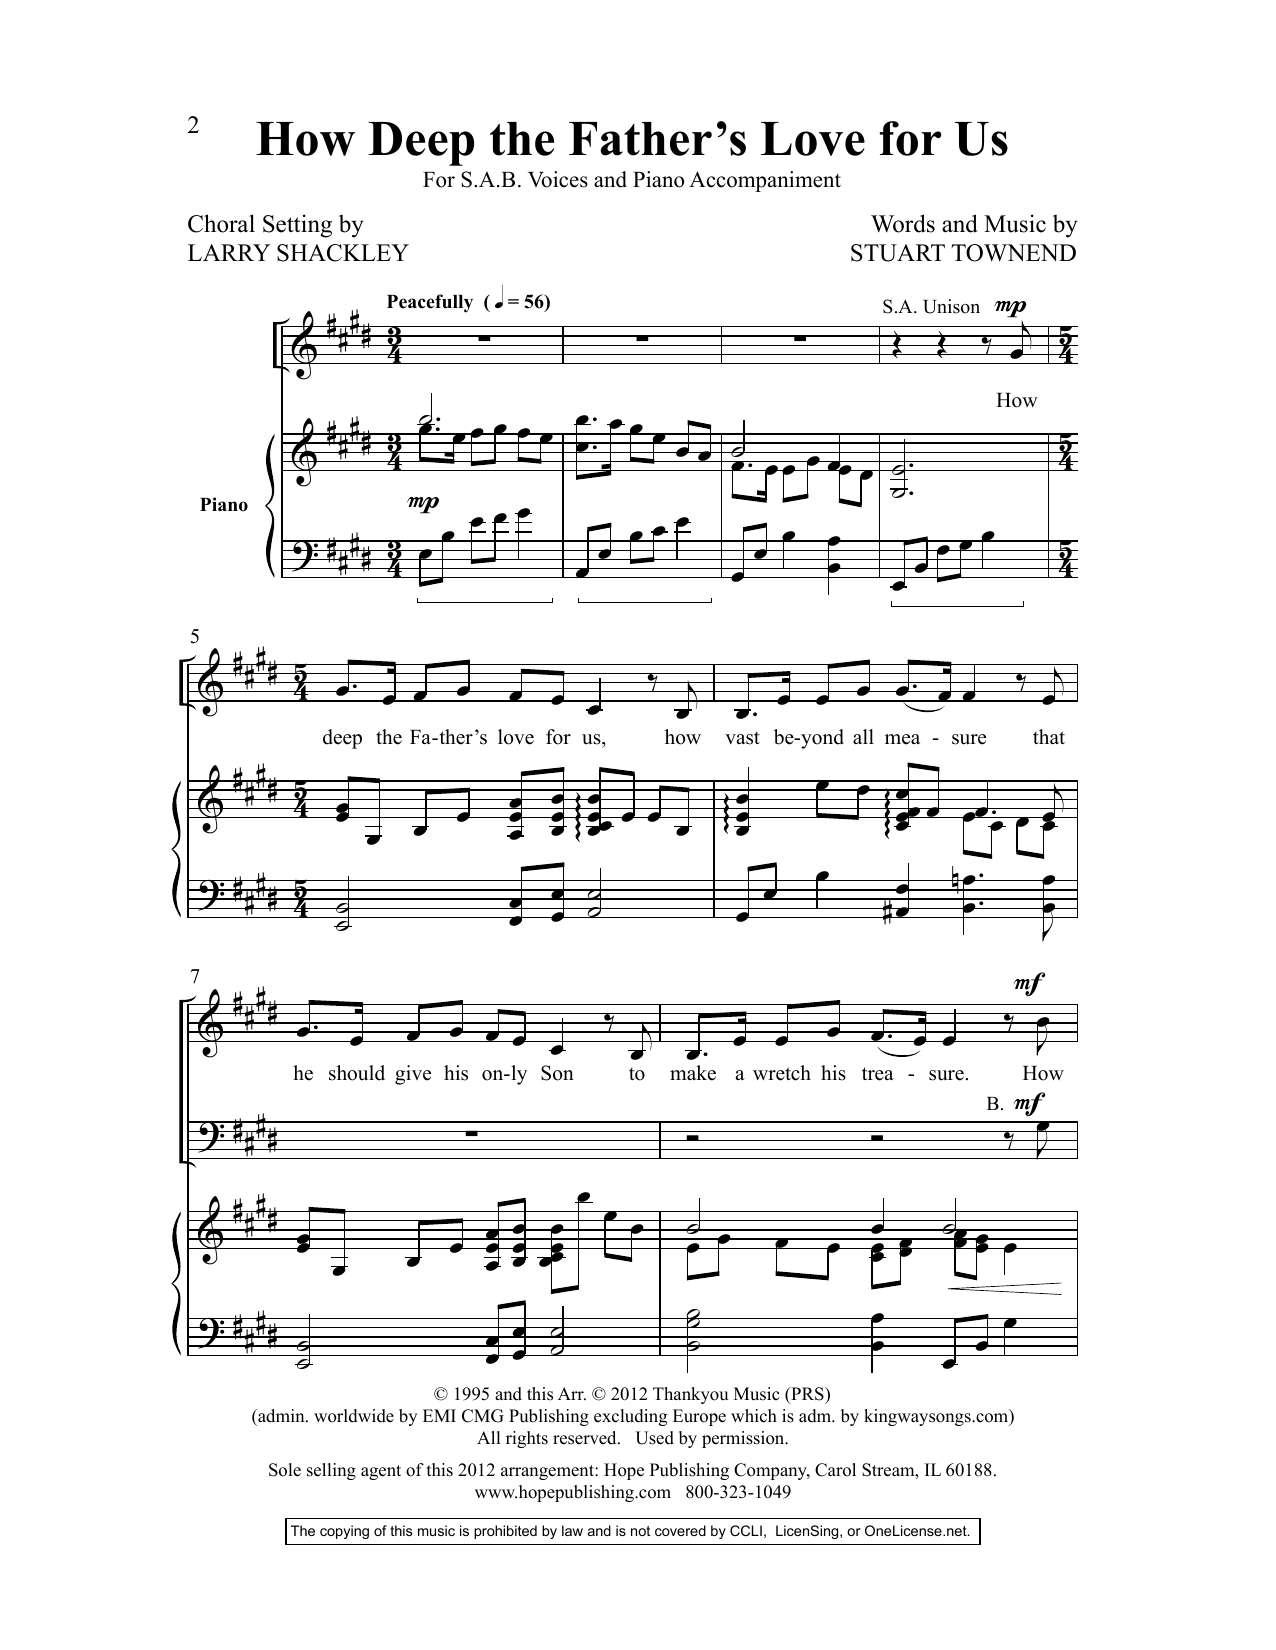 Download Stuart Townend How Deep the Father's Love for Us (arr. Sheet Music